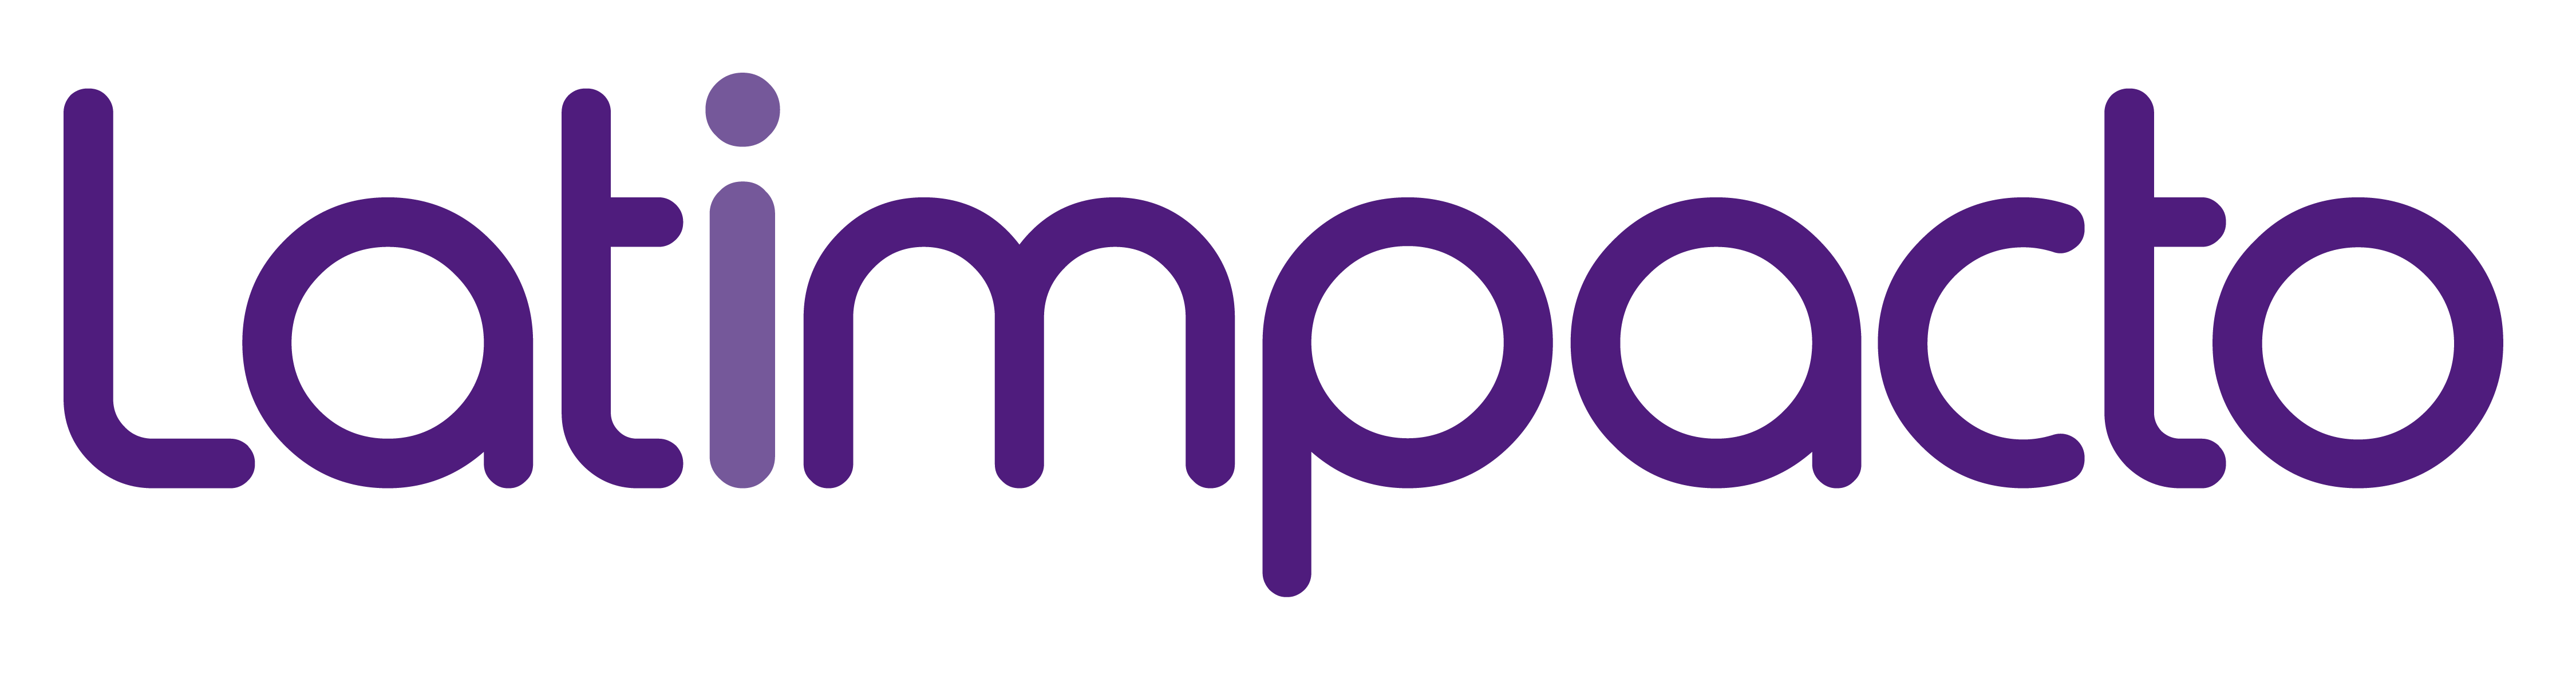 Latimpacto color logo without background